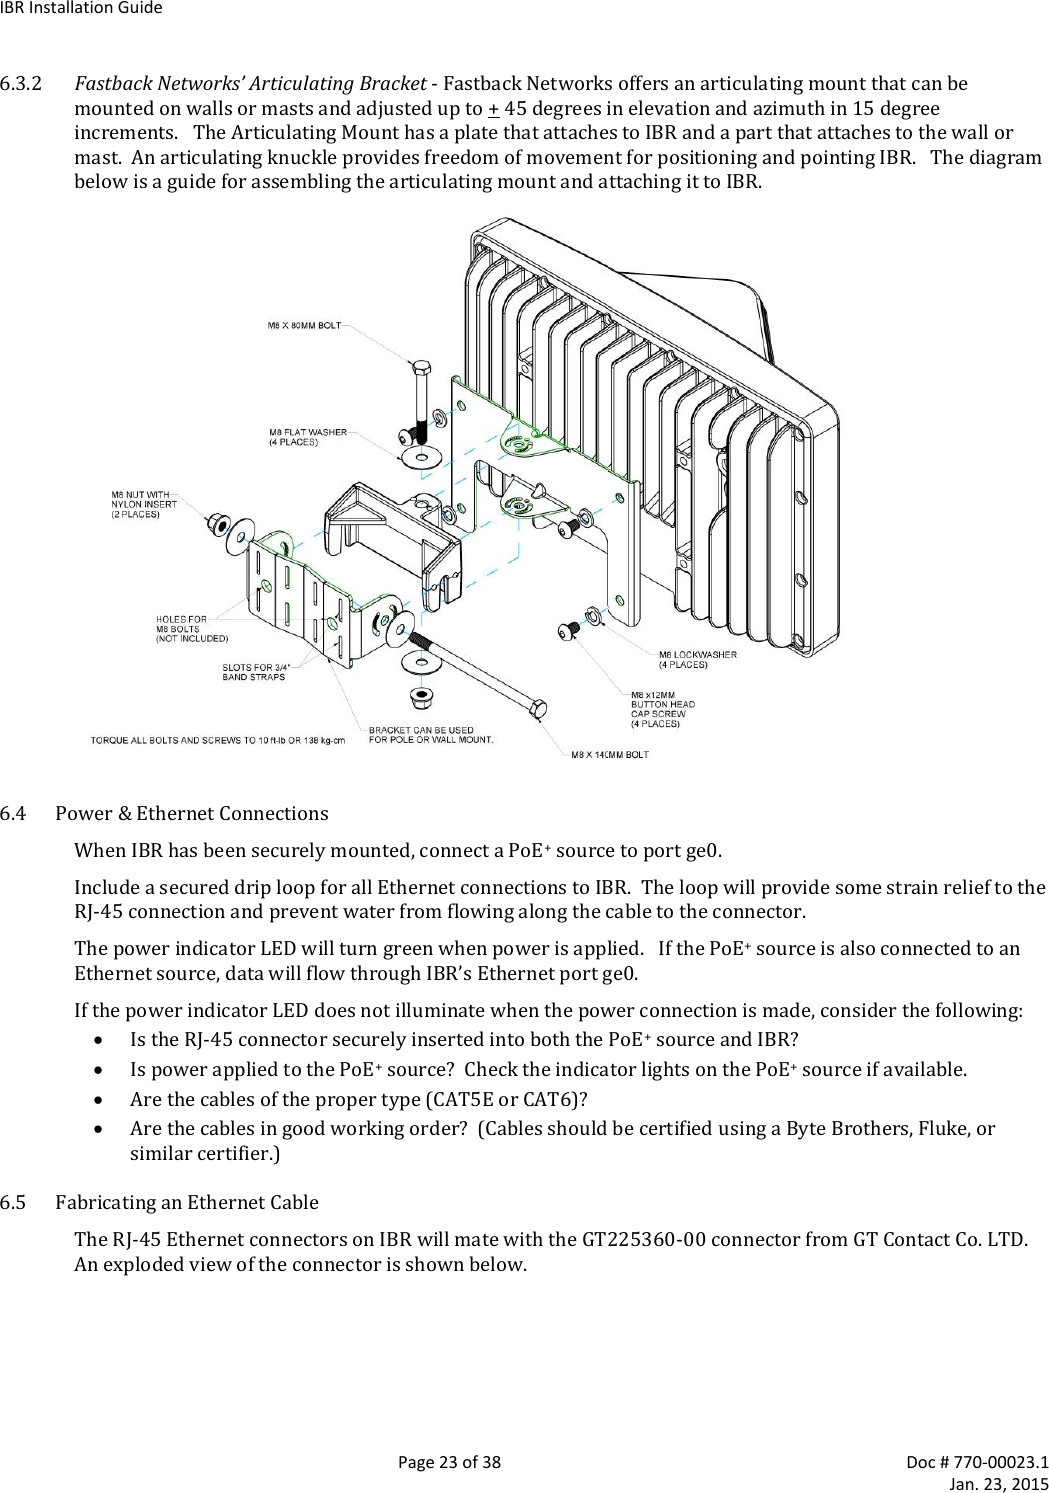 IBR Installation Guide   Page 23 of 38  Doc # 770-00023.1     Jan. 23, 2015 6.3.2 Fastback Networks’ Articulating Bracket - Fastback Networks offers an articulating mount that can be mounted on walls or masts and adjusted up to + 45 degrees in elevation and azimuth in 15 degree increments.   The Articulating Mount has a plate that attaches to IBR and a part that attaches to the wall or mast.  An articulating knuckle provides freedom of movement for positioning and pointing IBR.   The diagram below is a guide for assembling the articulating mount and attaching it to IBR.  6.4 Power &amp; Ethernet Connections When IBR has been securely mounted, connect a PoE+ source to port ge0.   Include a secured drip loop for all Ethernet connections to IBR.  The loop will provide some strain relief to the RJ-45 connection and prevent water from flowing along the cable to the connector. The power indicator LED will turn green when power is applied.   If the PoE+ source is also connected to an Ethernet source, data will flow through IBR’s Ethernet port ge0. If the power indicator LED does not illuminate when the power connection is made, consider the following:  Is the RJ-45 connector securely inserted into both the PoE+ source and IBR?  Is power applied to the PoE+ source?  Check the indicator lights on the PoE+ source if available.  Are the cables of the proper type (CAT5E or CAT6)?  Are the cables in good working order?  (Cables should be certified using a Byte Brothers, Fluke, or similar certifier.) 6.5 Fabricating an Ethernet Cable The RJ-45 Ethernet connectors on IBR will mate with the GT225360-00 connector from GT Contact Co. LTD.  An exploded view of the connector is shown below.  